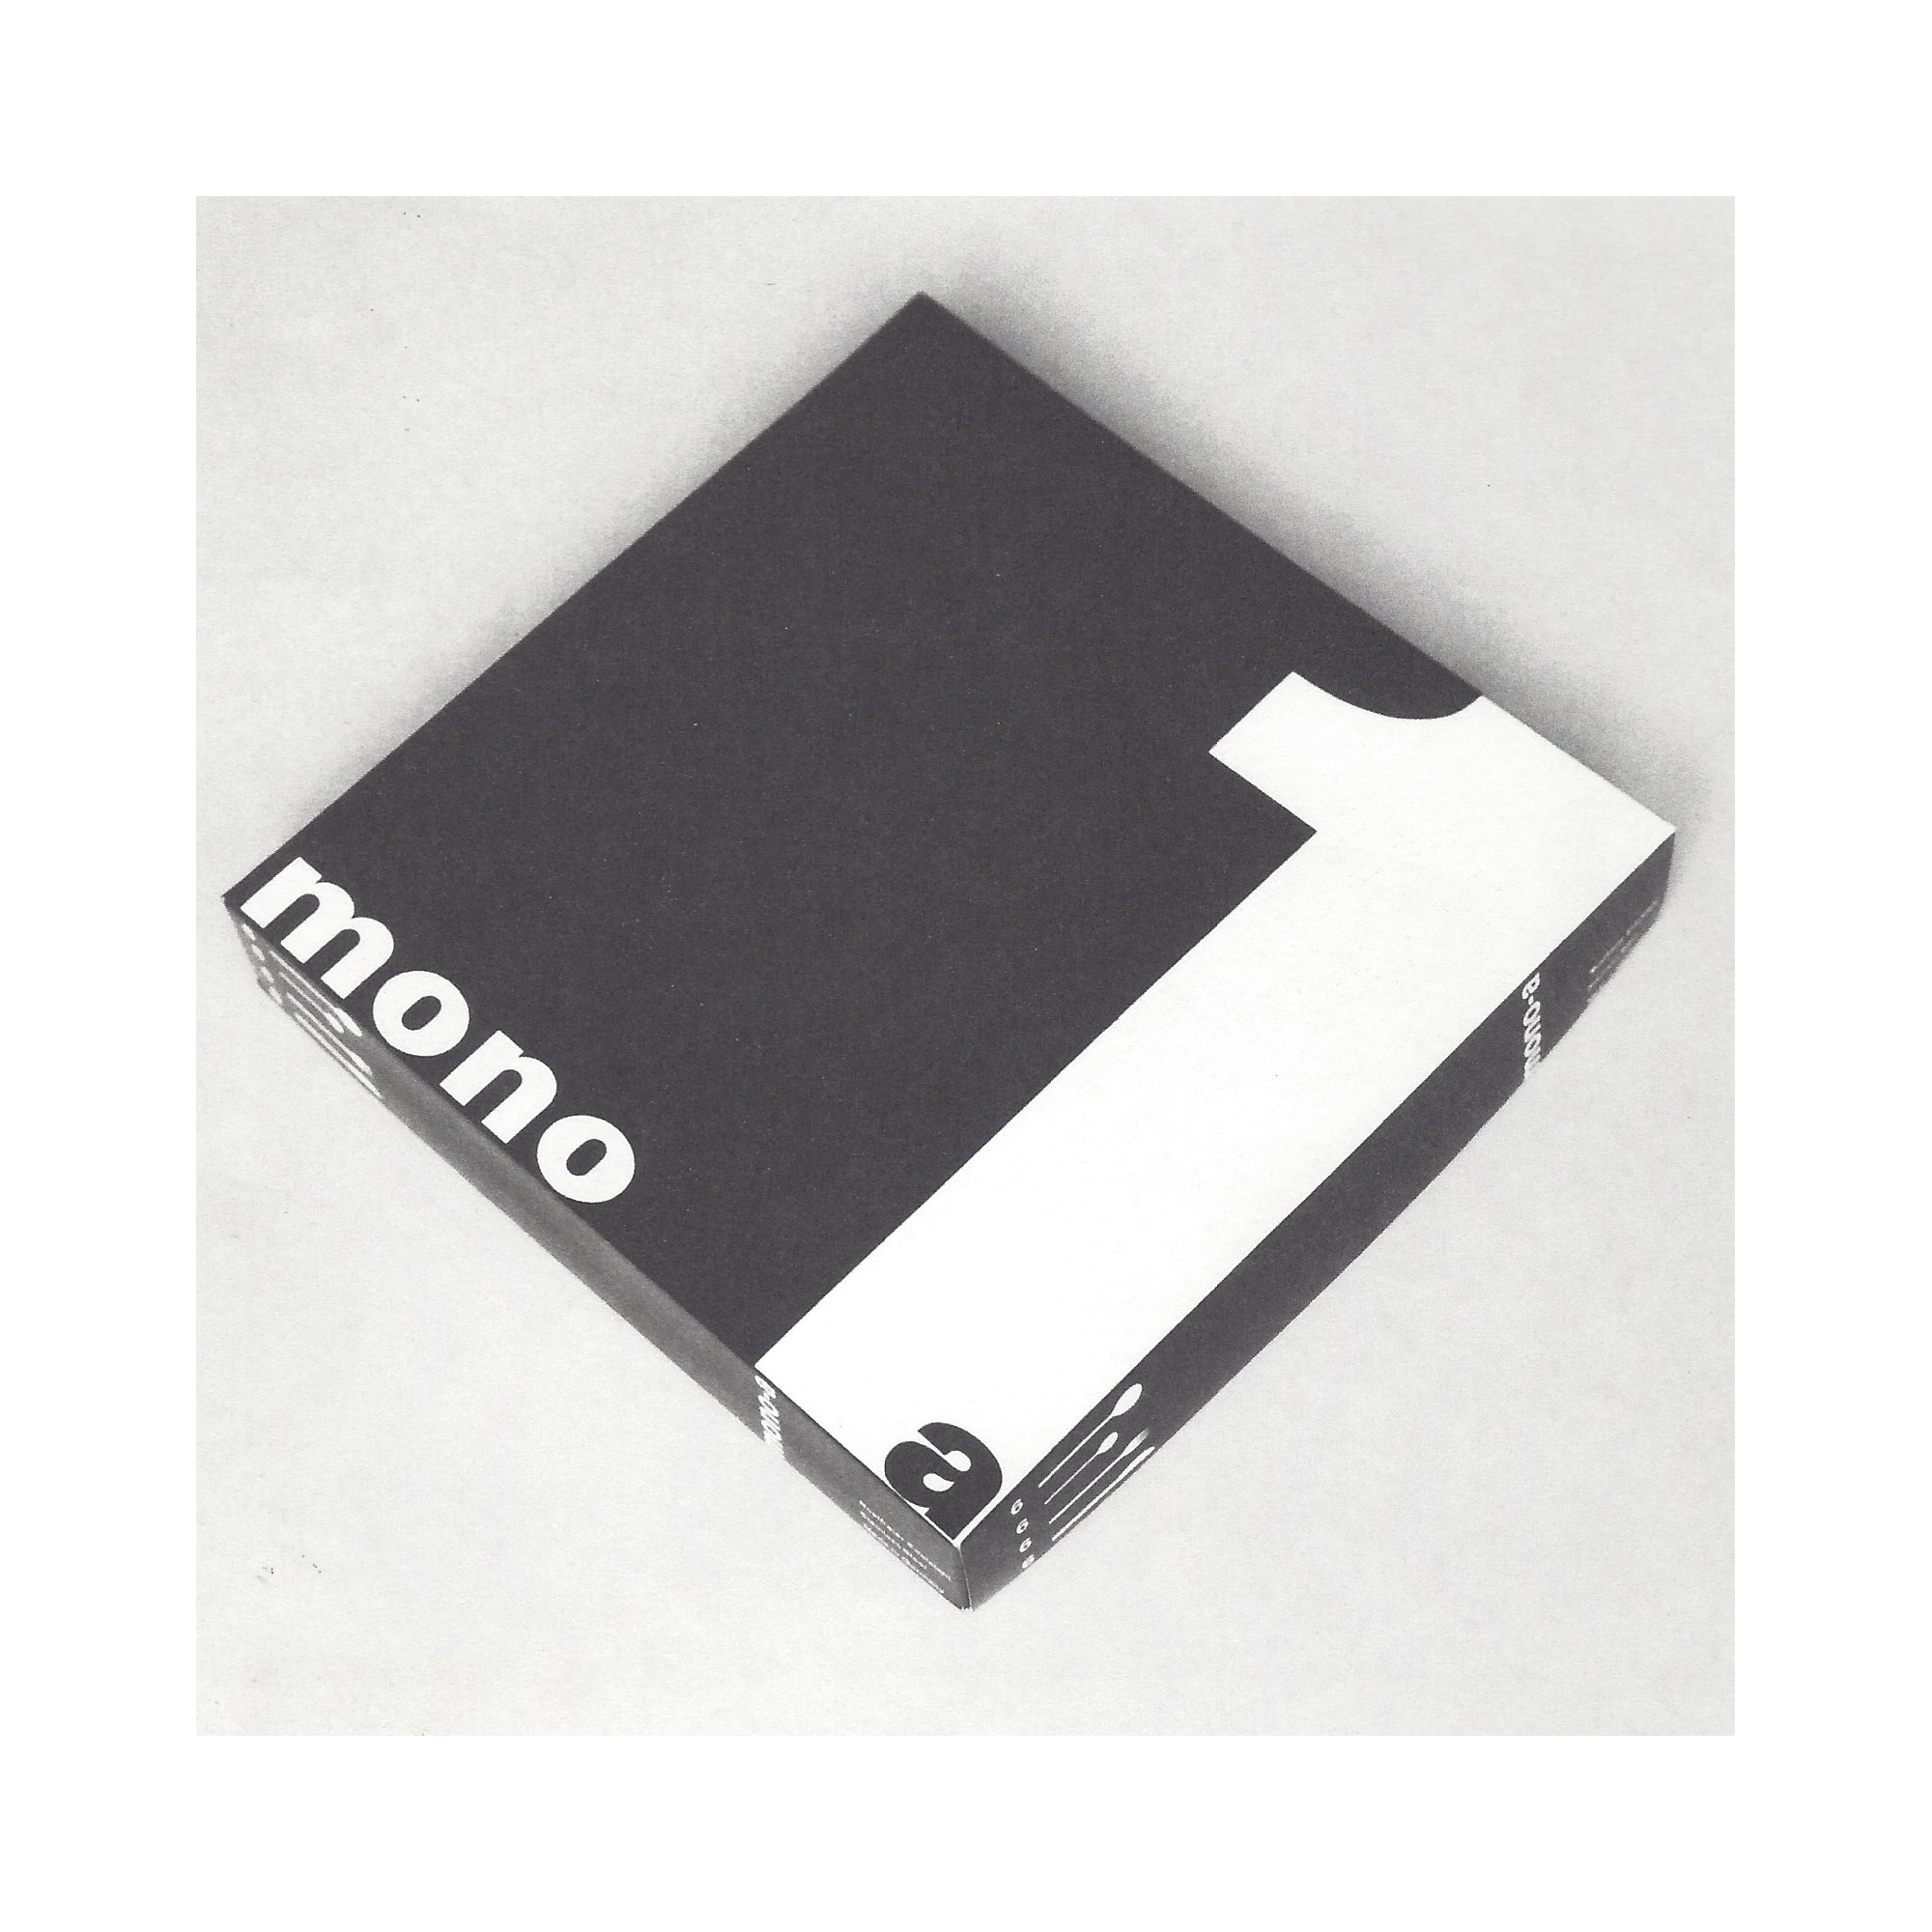 mono a history packaging